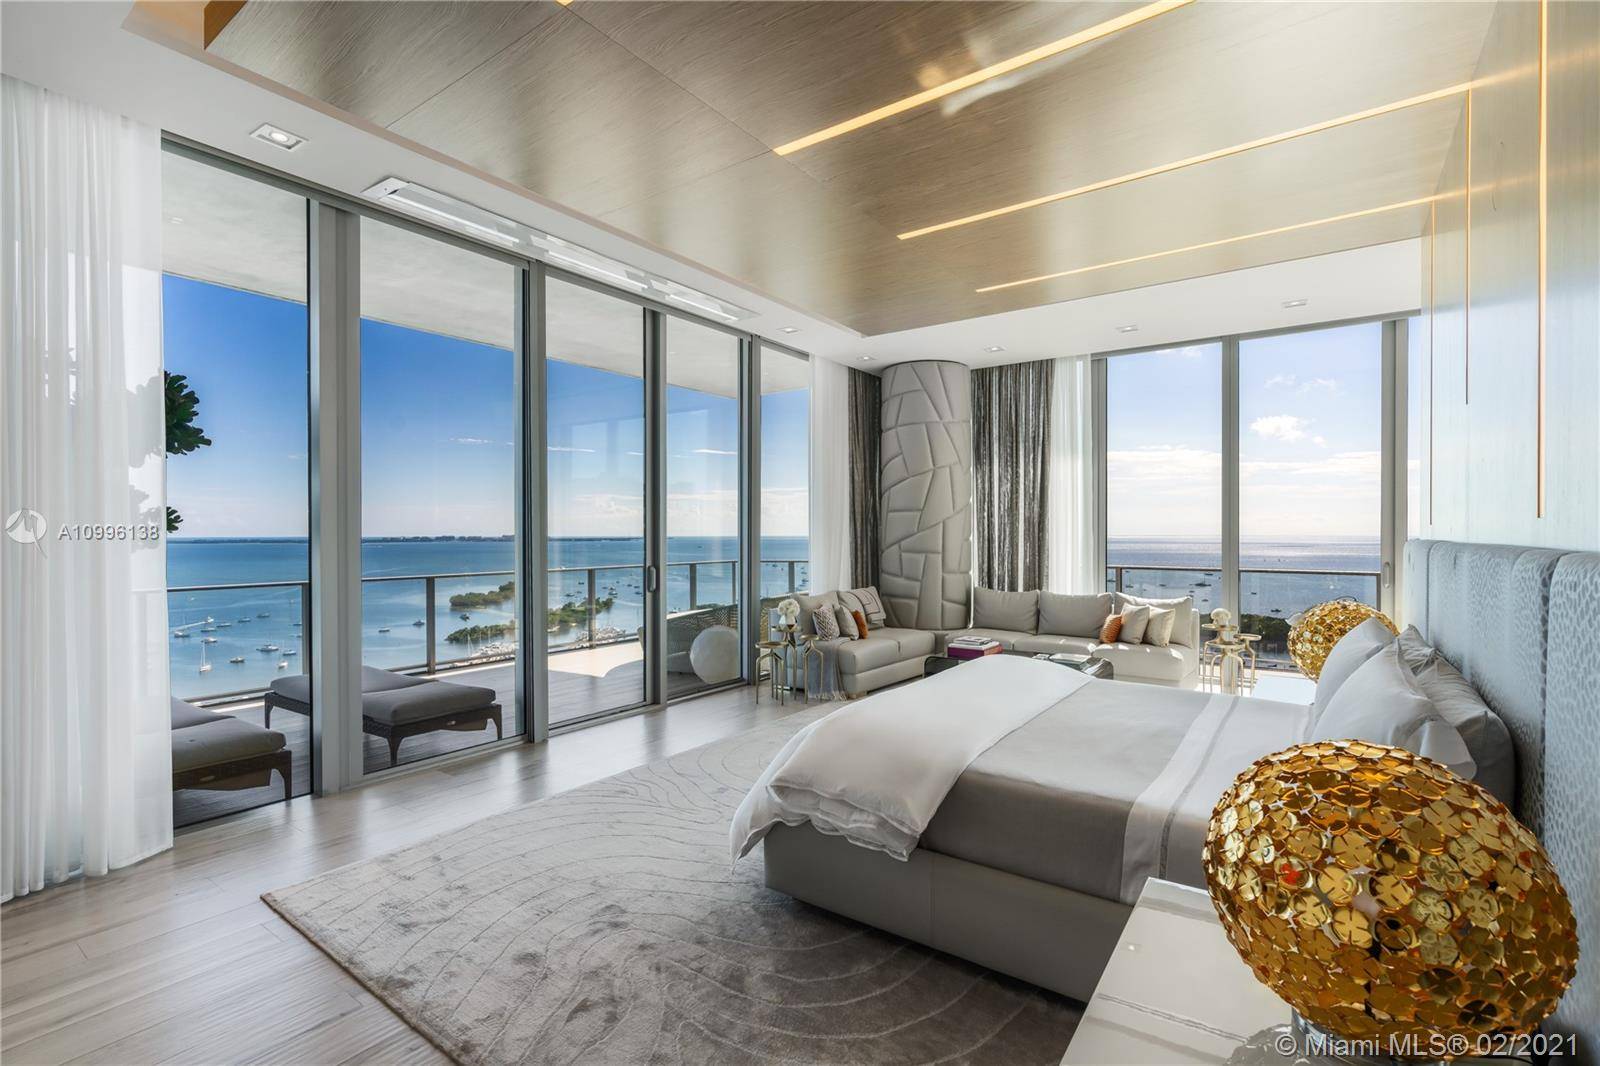 In the heart of swanky Coconut Grove, footsteps away from couture shopping and exquisite dining, sits this magnificent, fully furnished 10, 180 square foot penthouse in the sky.